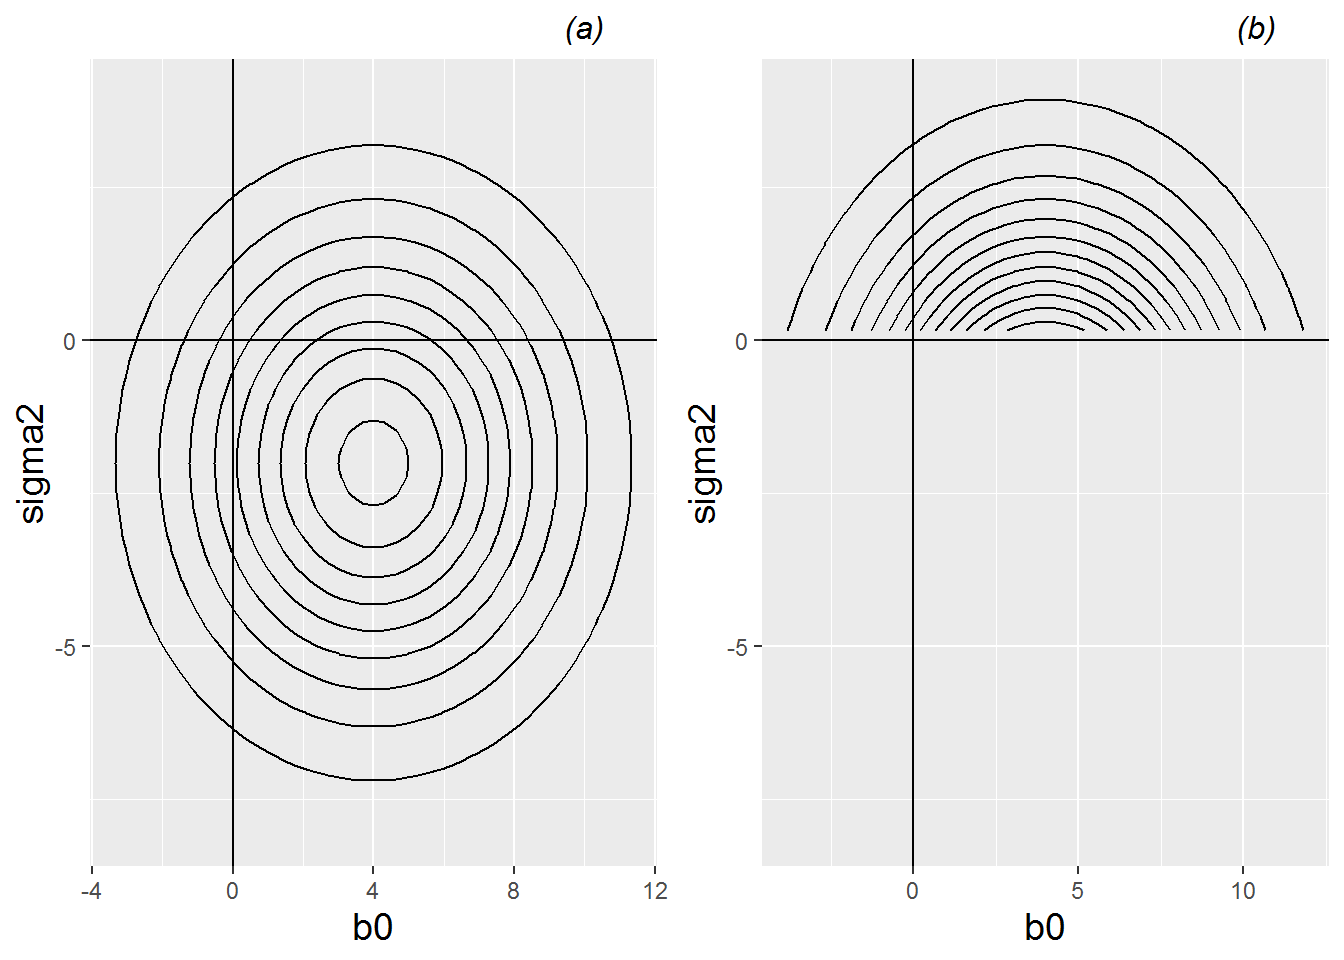 Left (a): hypothetical contours of the likelihood function \(L(\beta_0, \sigma^2)\) with no restrictions on \(\sigma^2\); the likelihood function is maximized at \((\hat{\beta}_0, \hat{\sigma}^2)=(4,-2)\). Right (b): hypothetical contours of the likelihood function \(L(\beta_0, \sigma^2)\) with the restriction that \(\sigma^2 \geq 0\); the constrained likelihood function is maximized at \((\hat{\beta}_0, \hat{\sigma}^2)=(4,0)\)